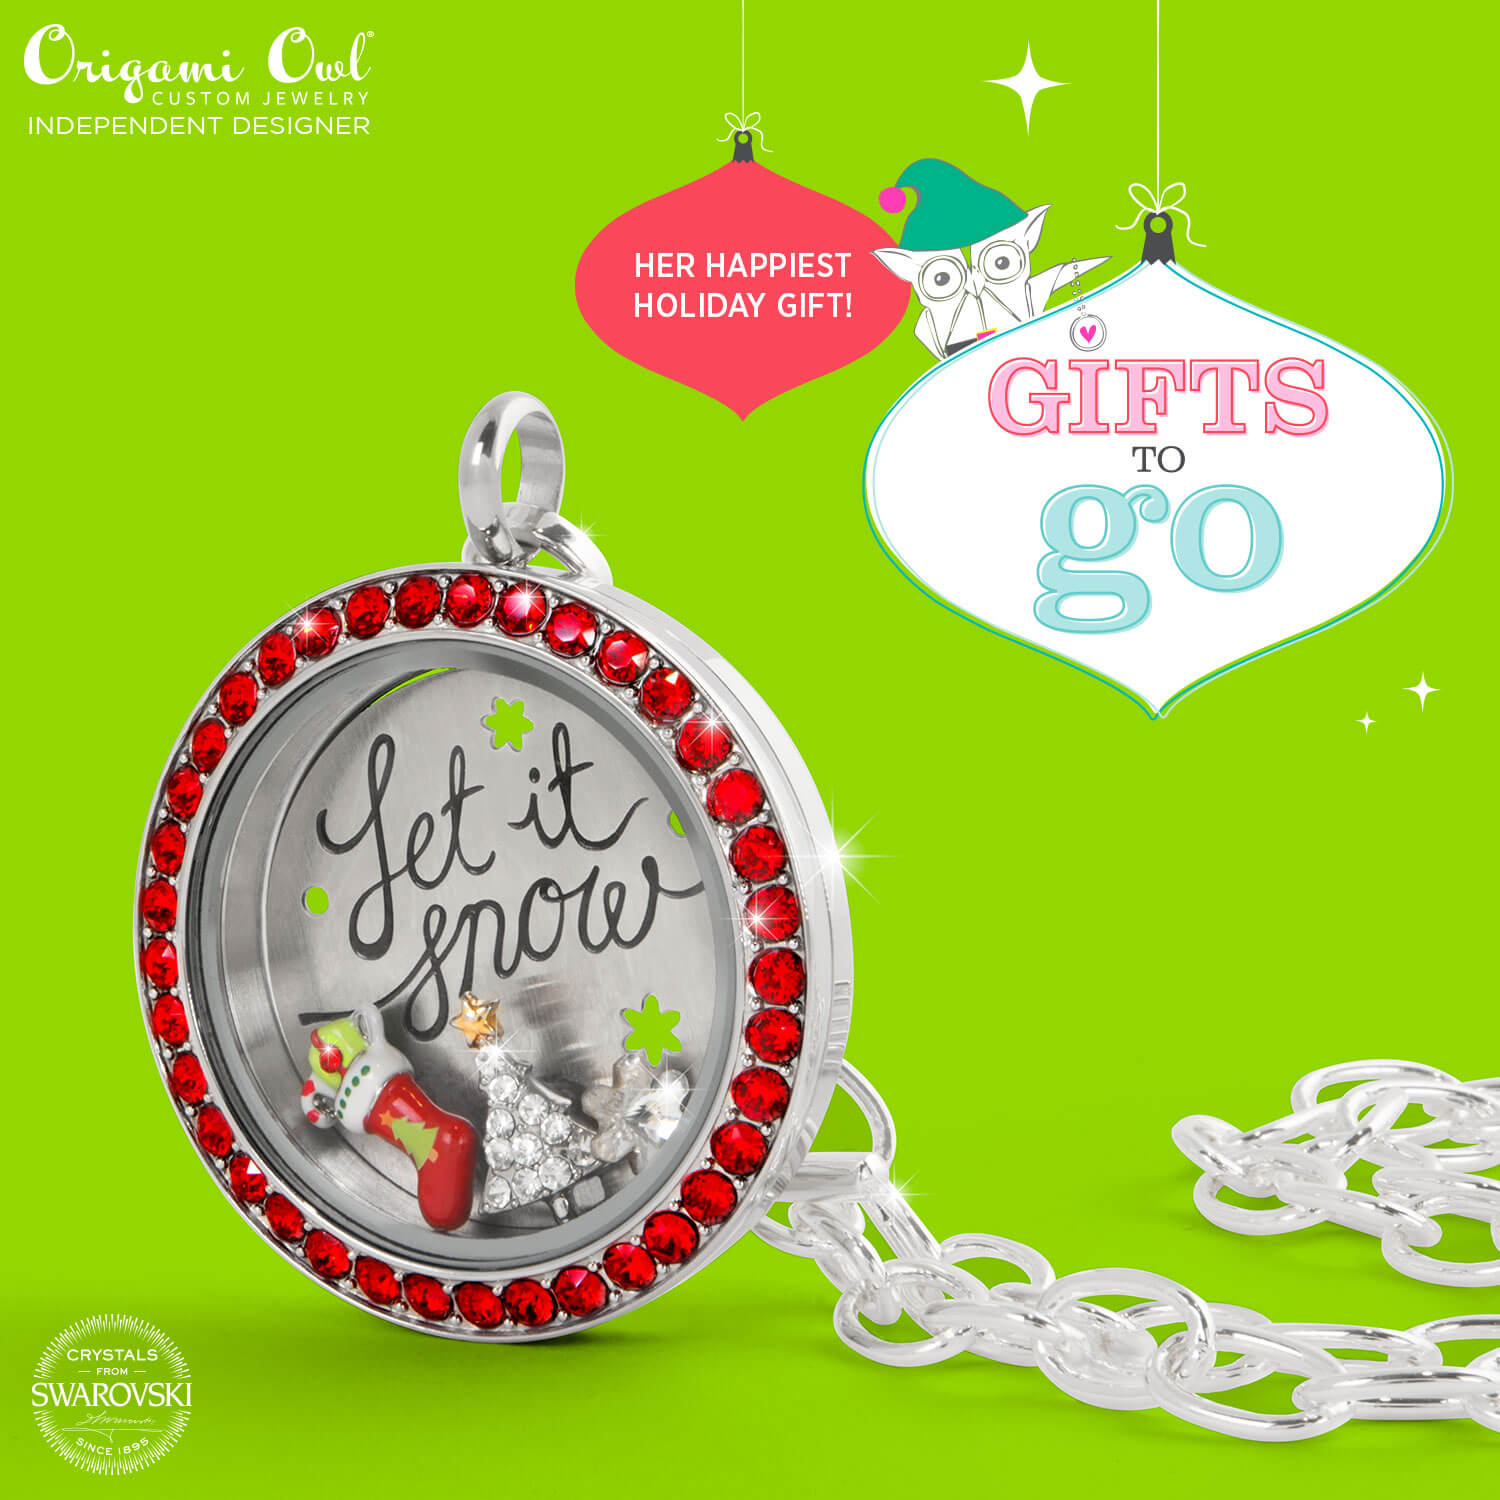 Origami Owl Prices Origami Owl Gifts To Go Make Gift Giving Easy San Diego Origami